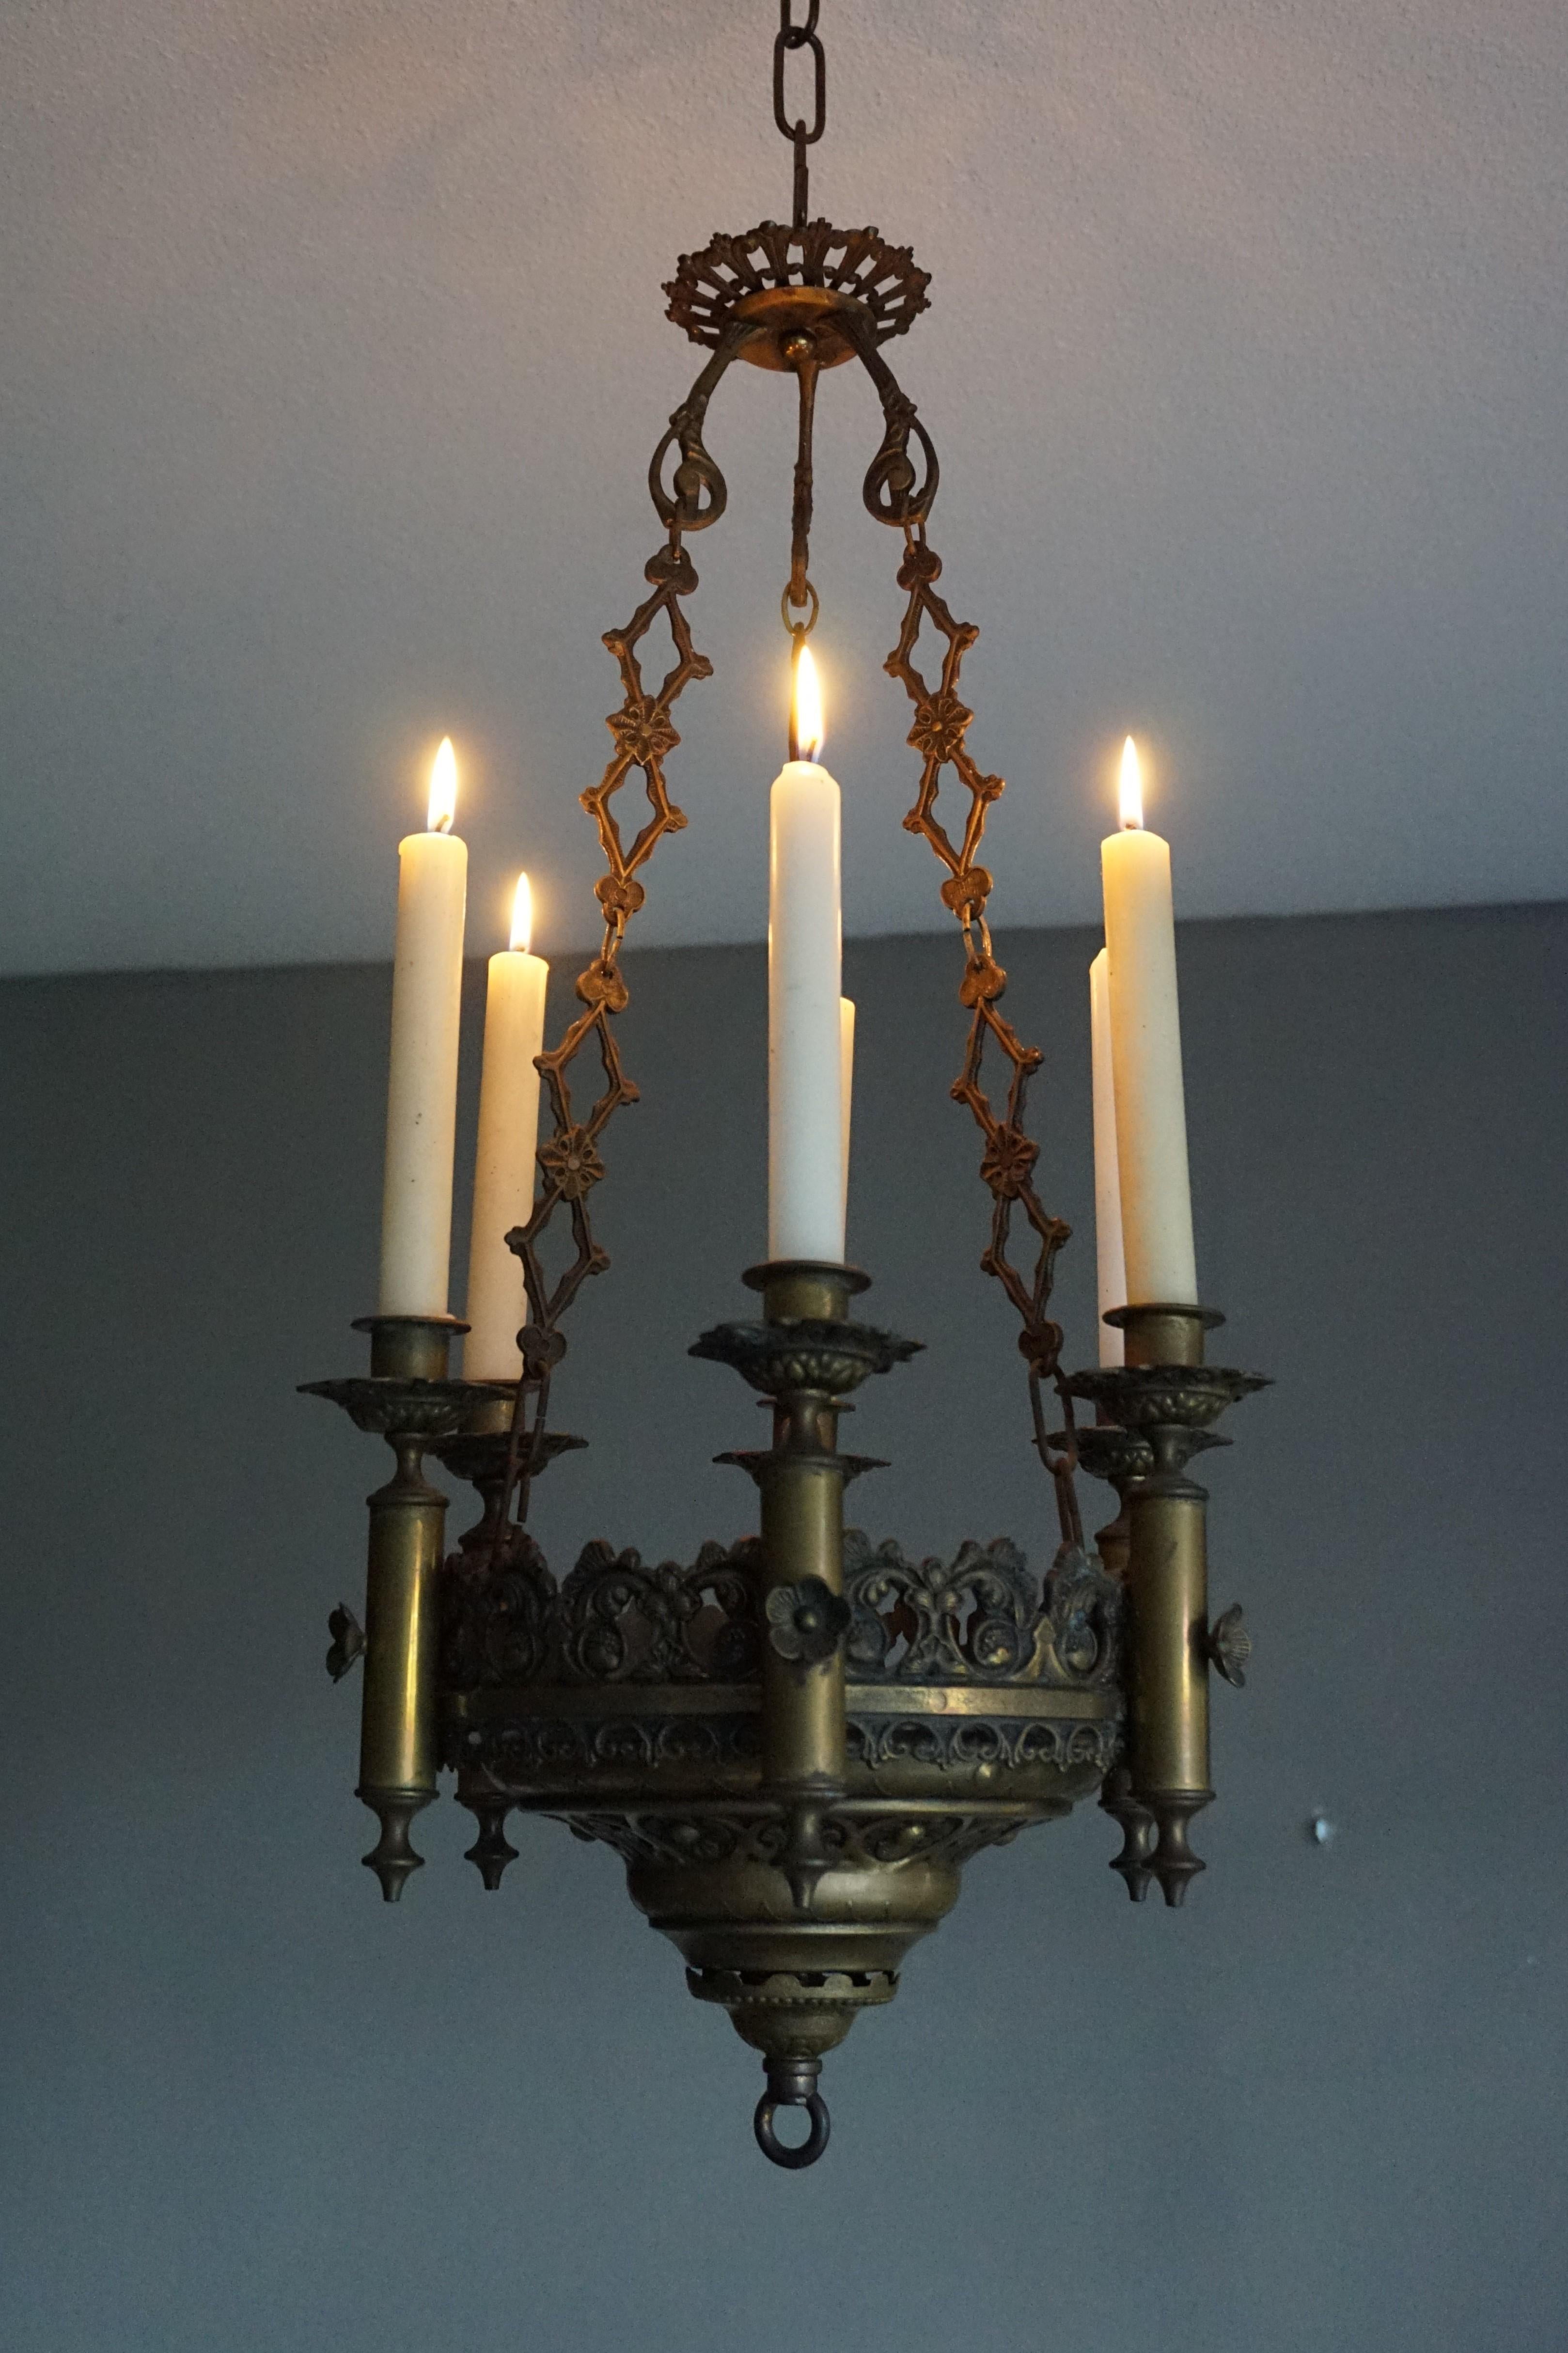 Beautiful and meaningful little work of religious art for a serene atmosphere.

This small size and compact church candle chandelier is perfect for creating a spiritual atmosphere. It comes with a number of stylized Gothic elements (such as the